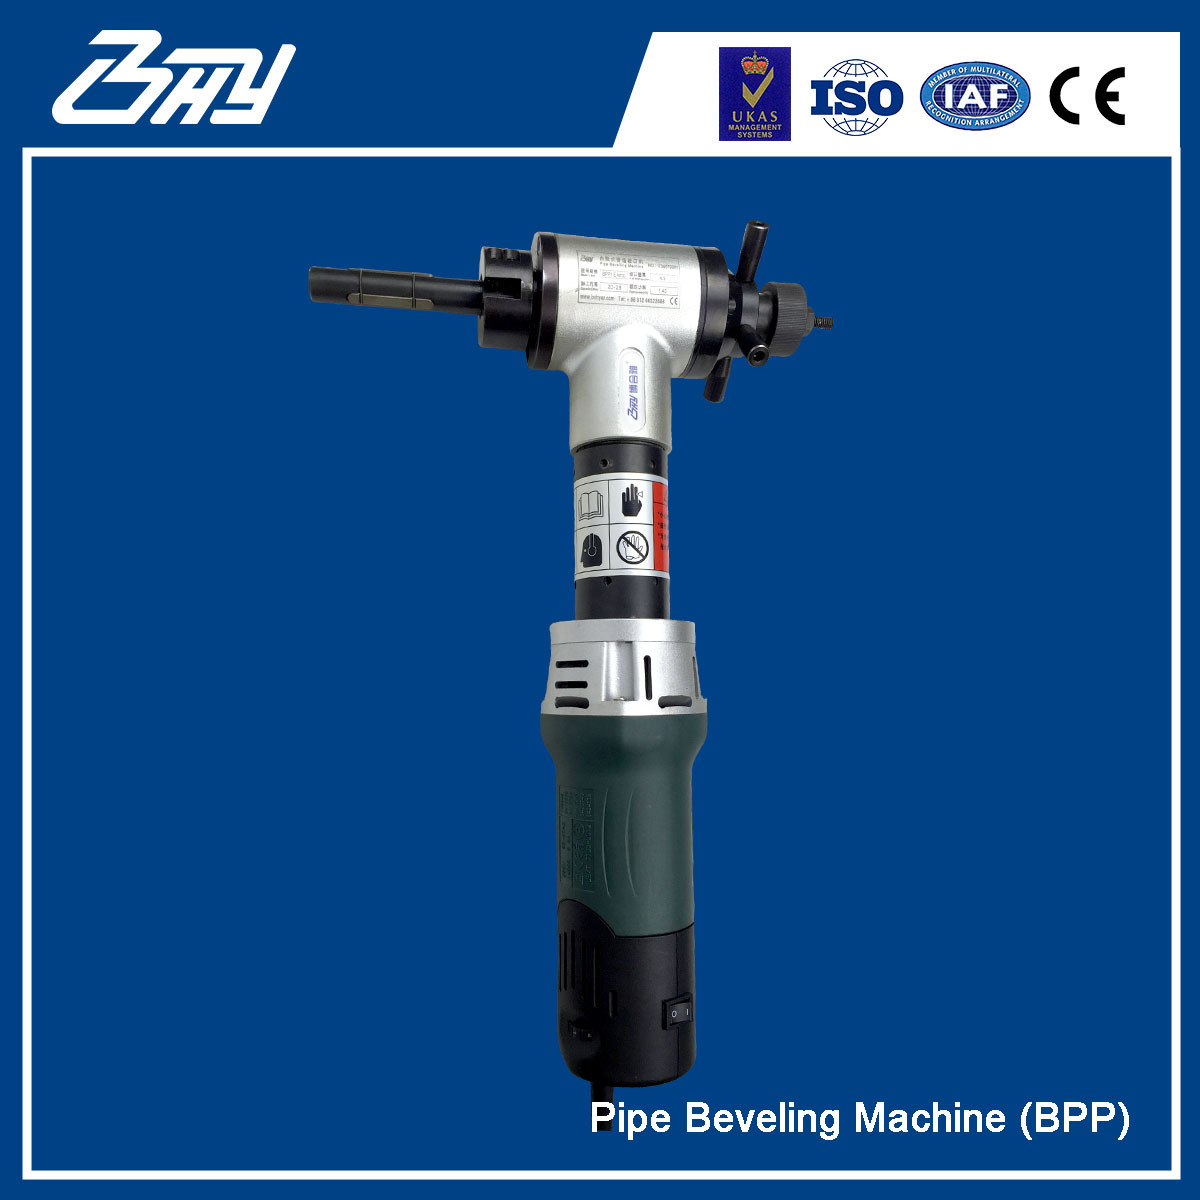 ID-Mounted Portable Electric / Pneumatic Cold Pipe Beveling Machine / Pipe Beveler - BPP3E /BPP3P